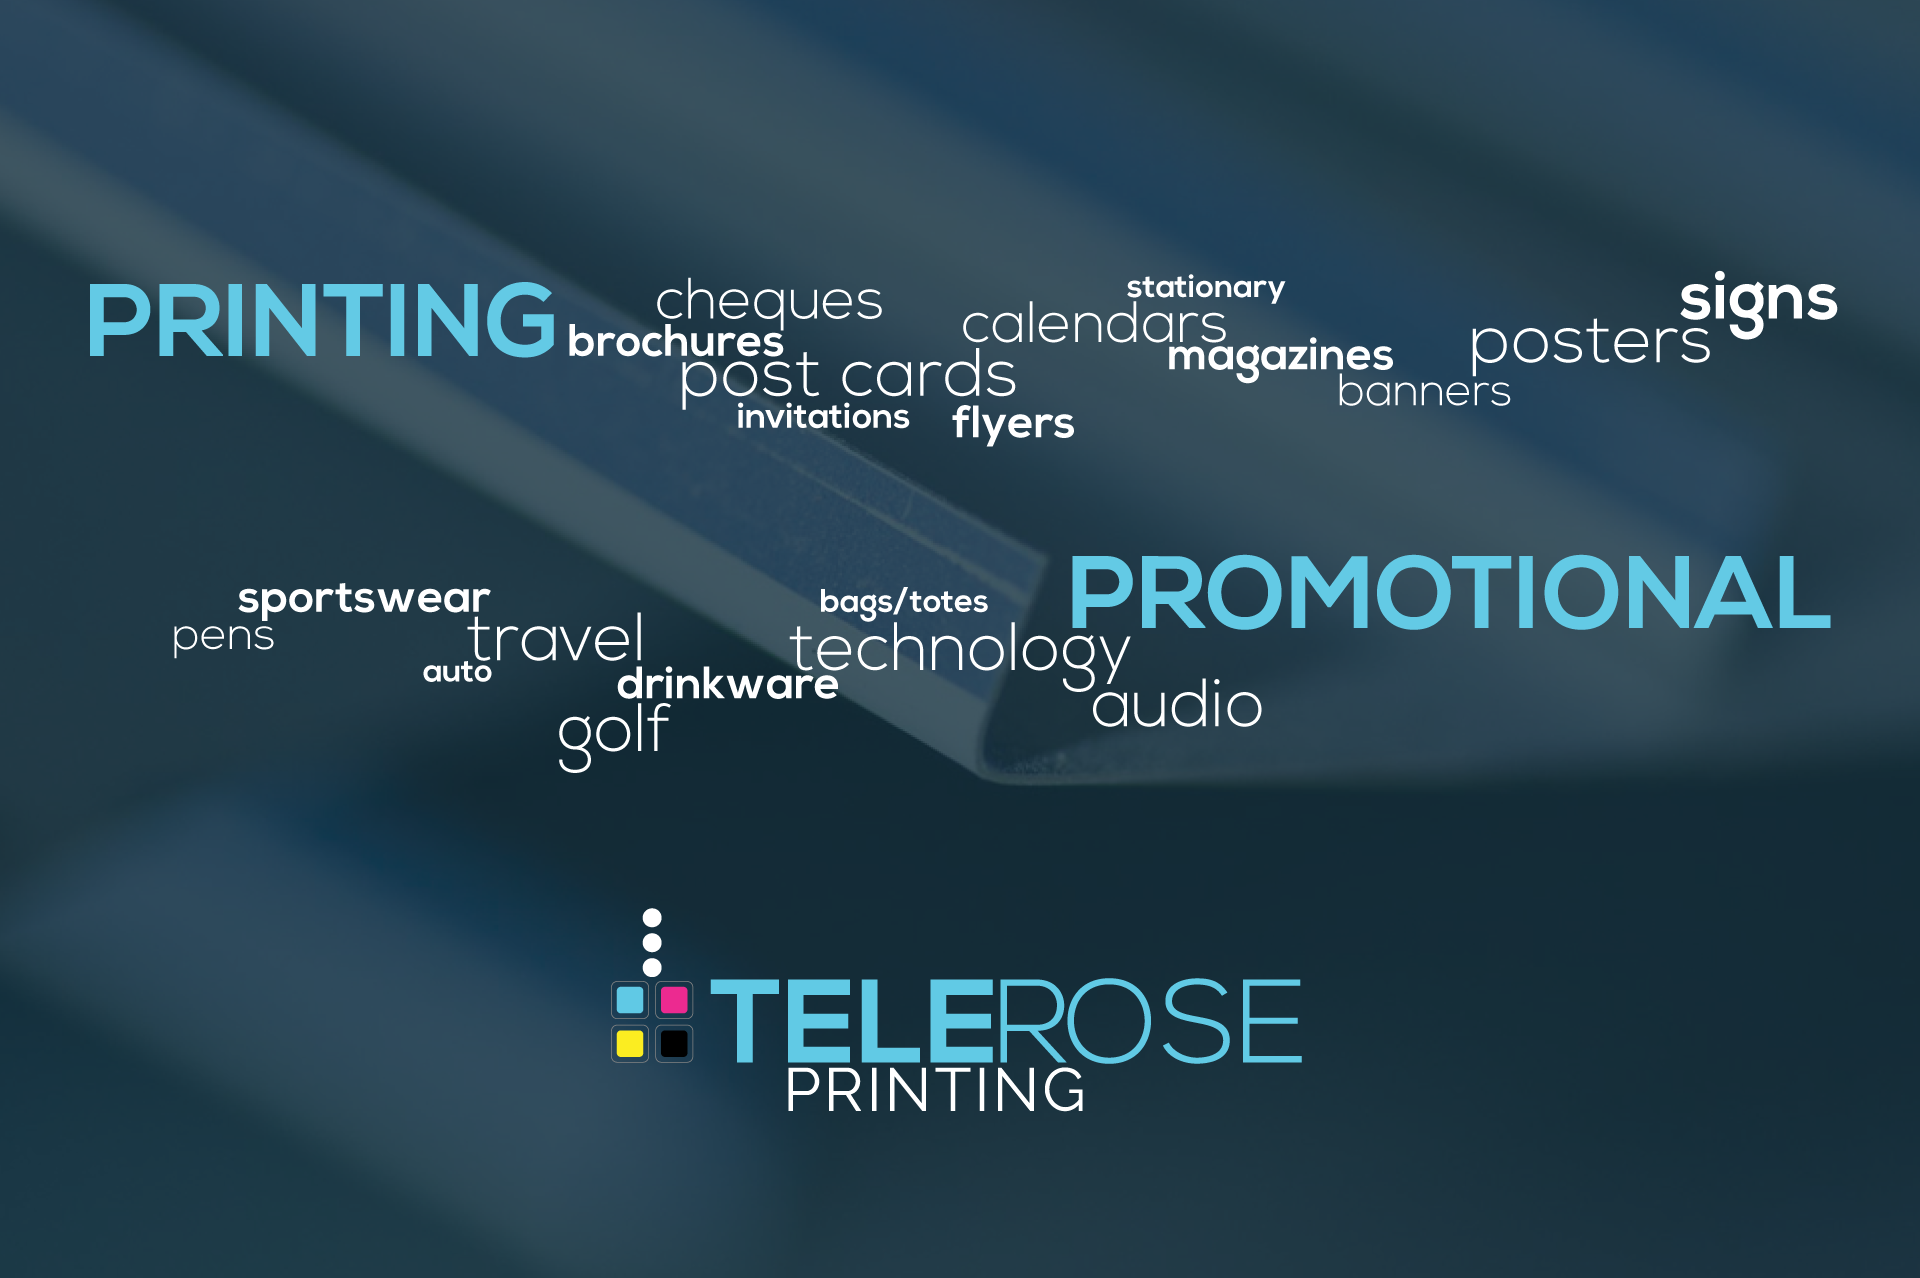 promotional printing company for postcards, posters, and signs, telerose